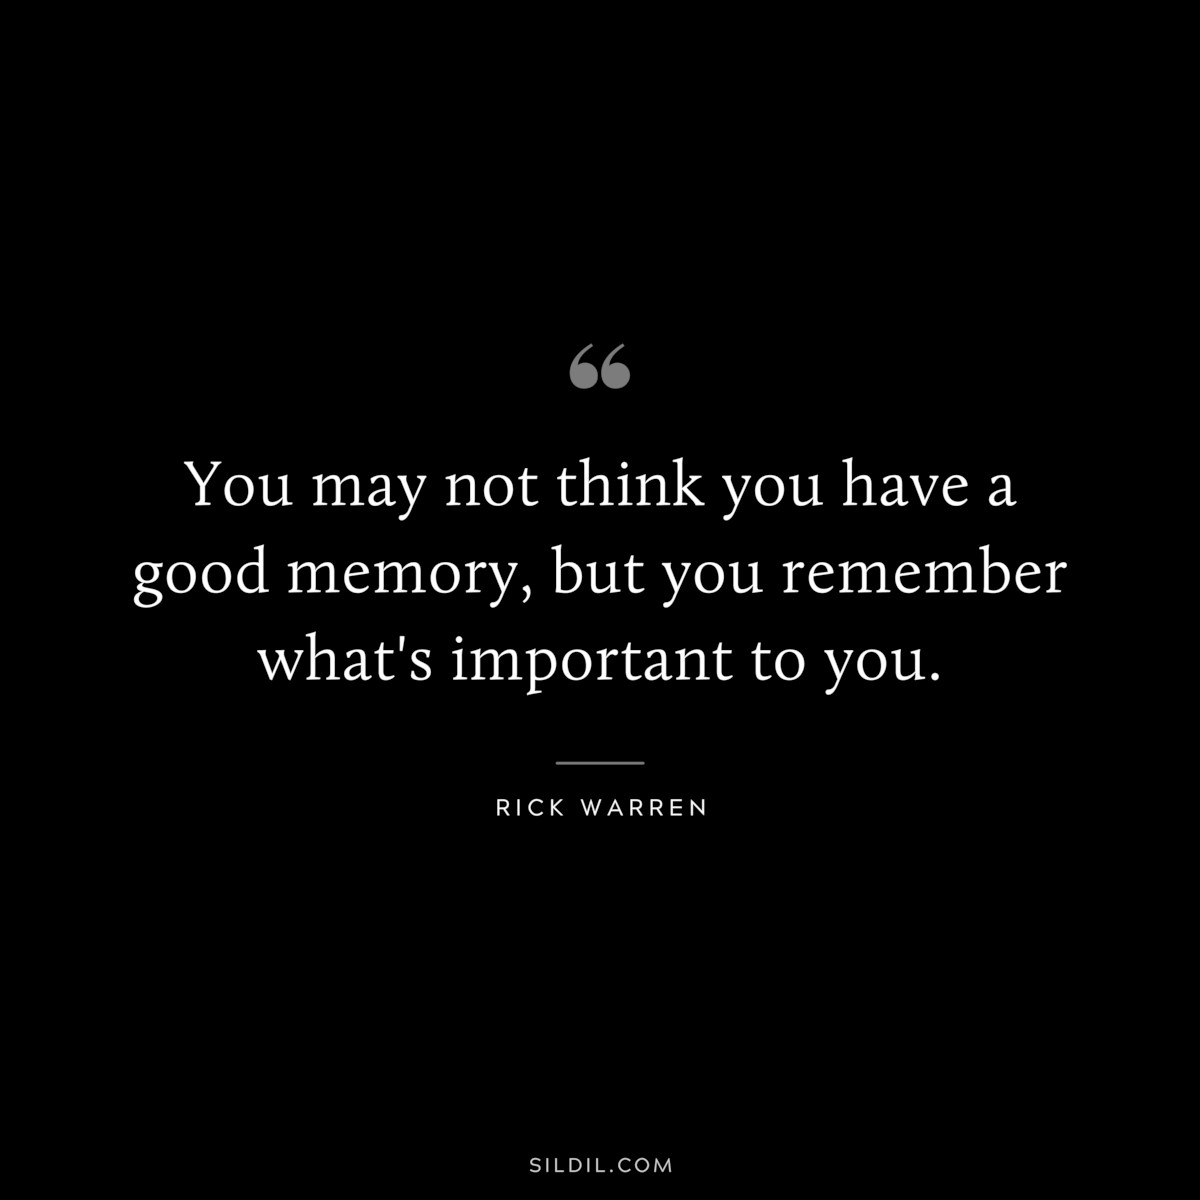 You may not think you have a good memory, but you remember what's important to you. ― Rick Warren